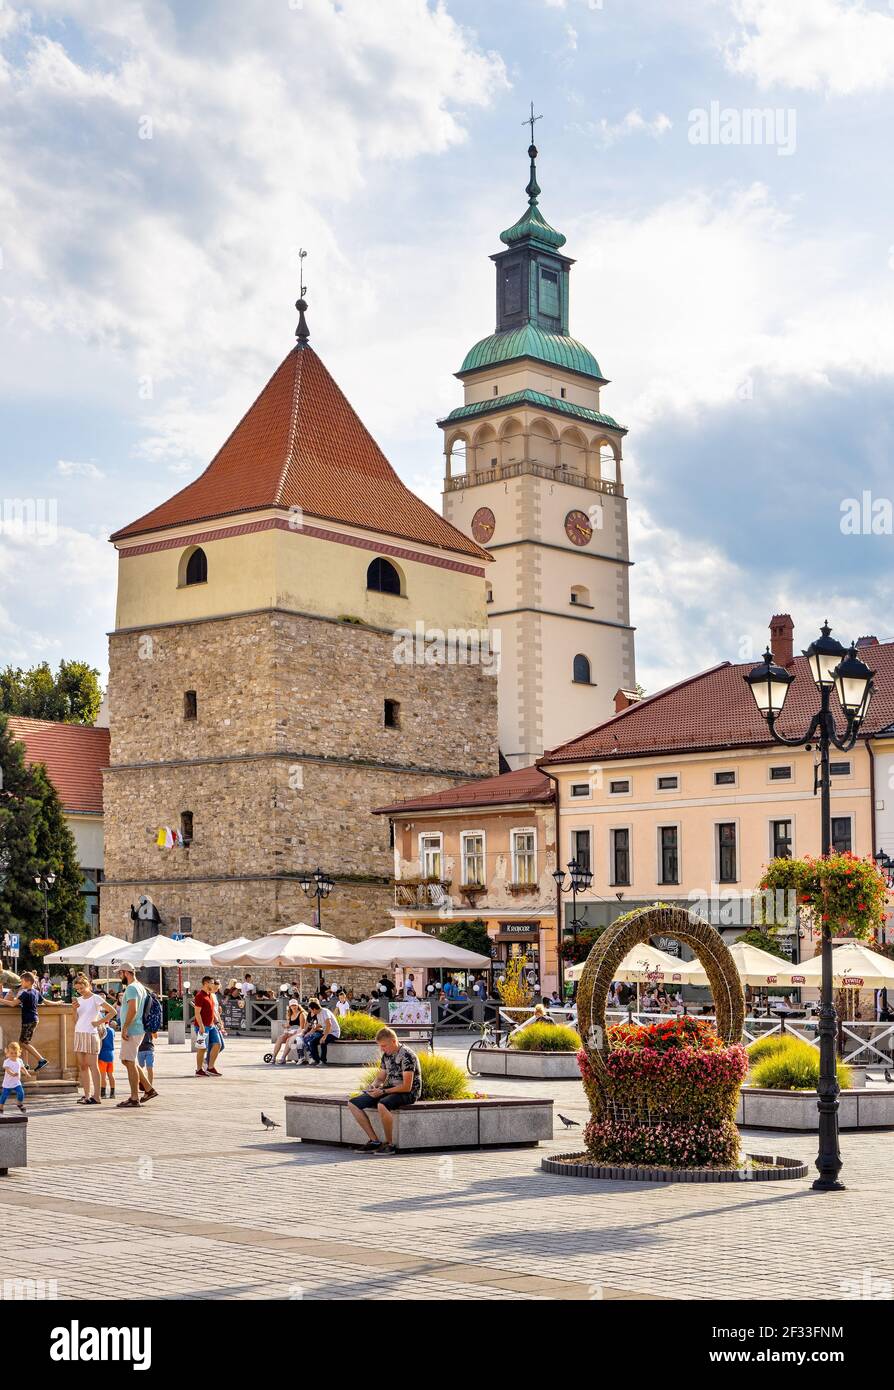 Zywiec, Poland - August 30, 2020: Panoramic view of market square with historic stone bell tower and Cathedral of Nativity of Blessed Virgin Mary Stock Photo